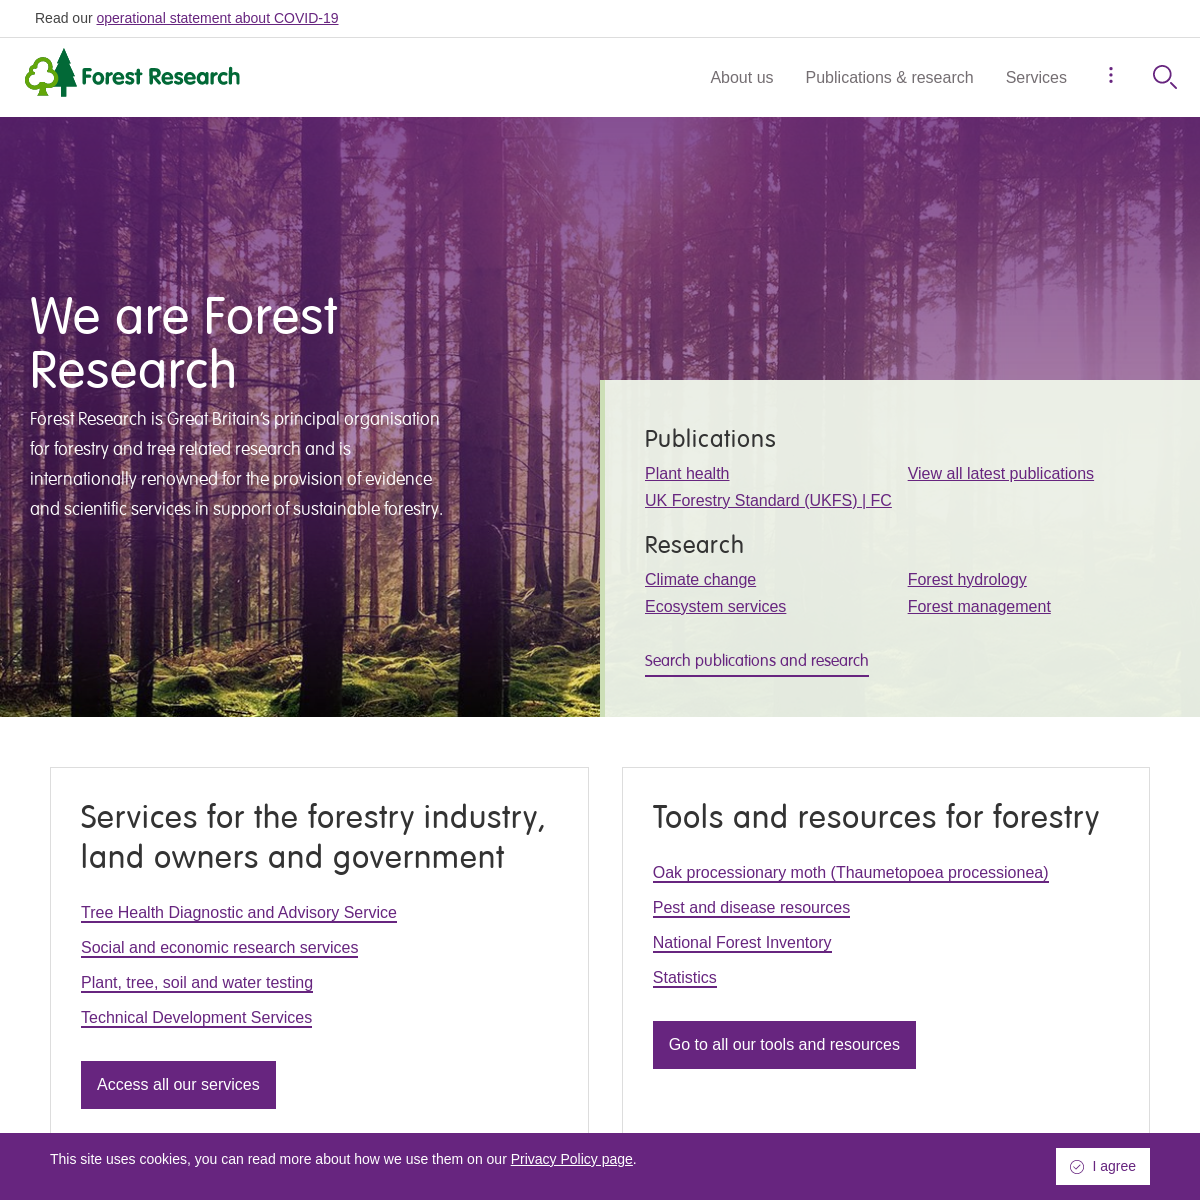 A complete backup of forestresearch.gov.uk